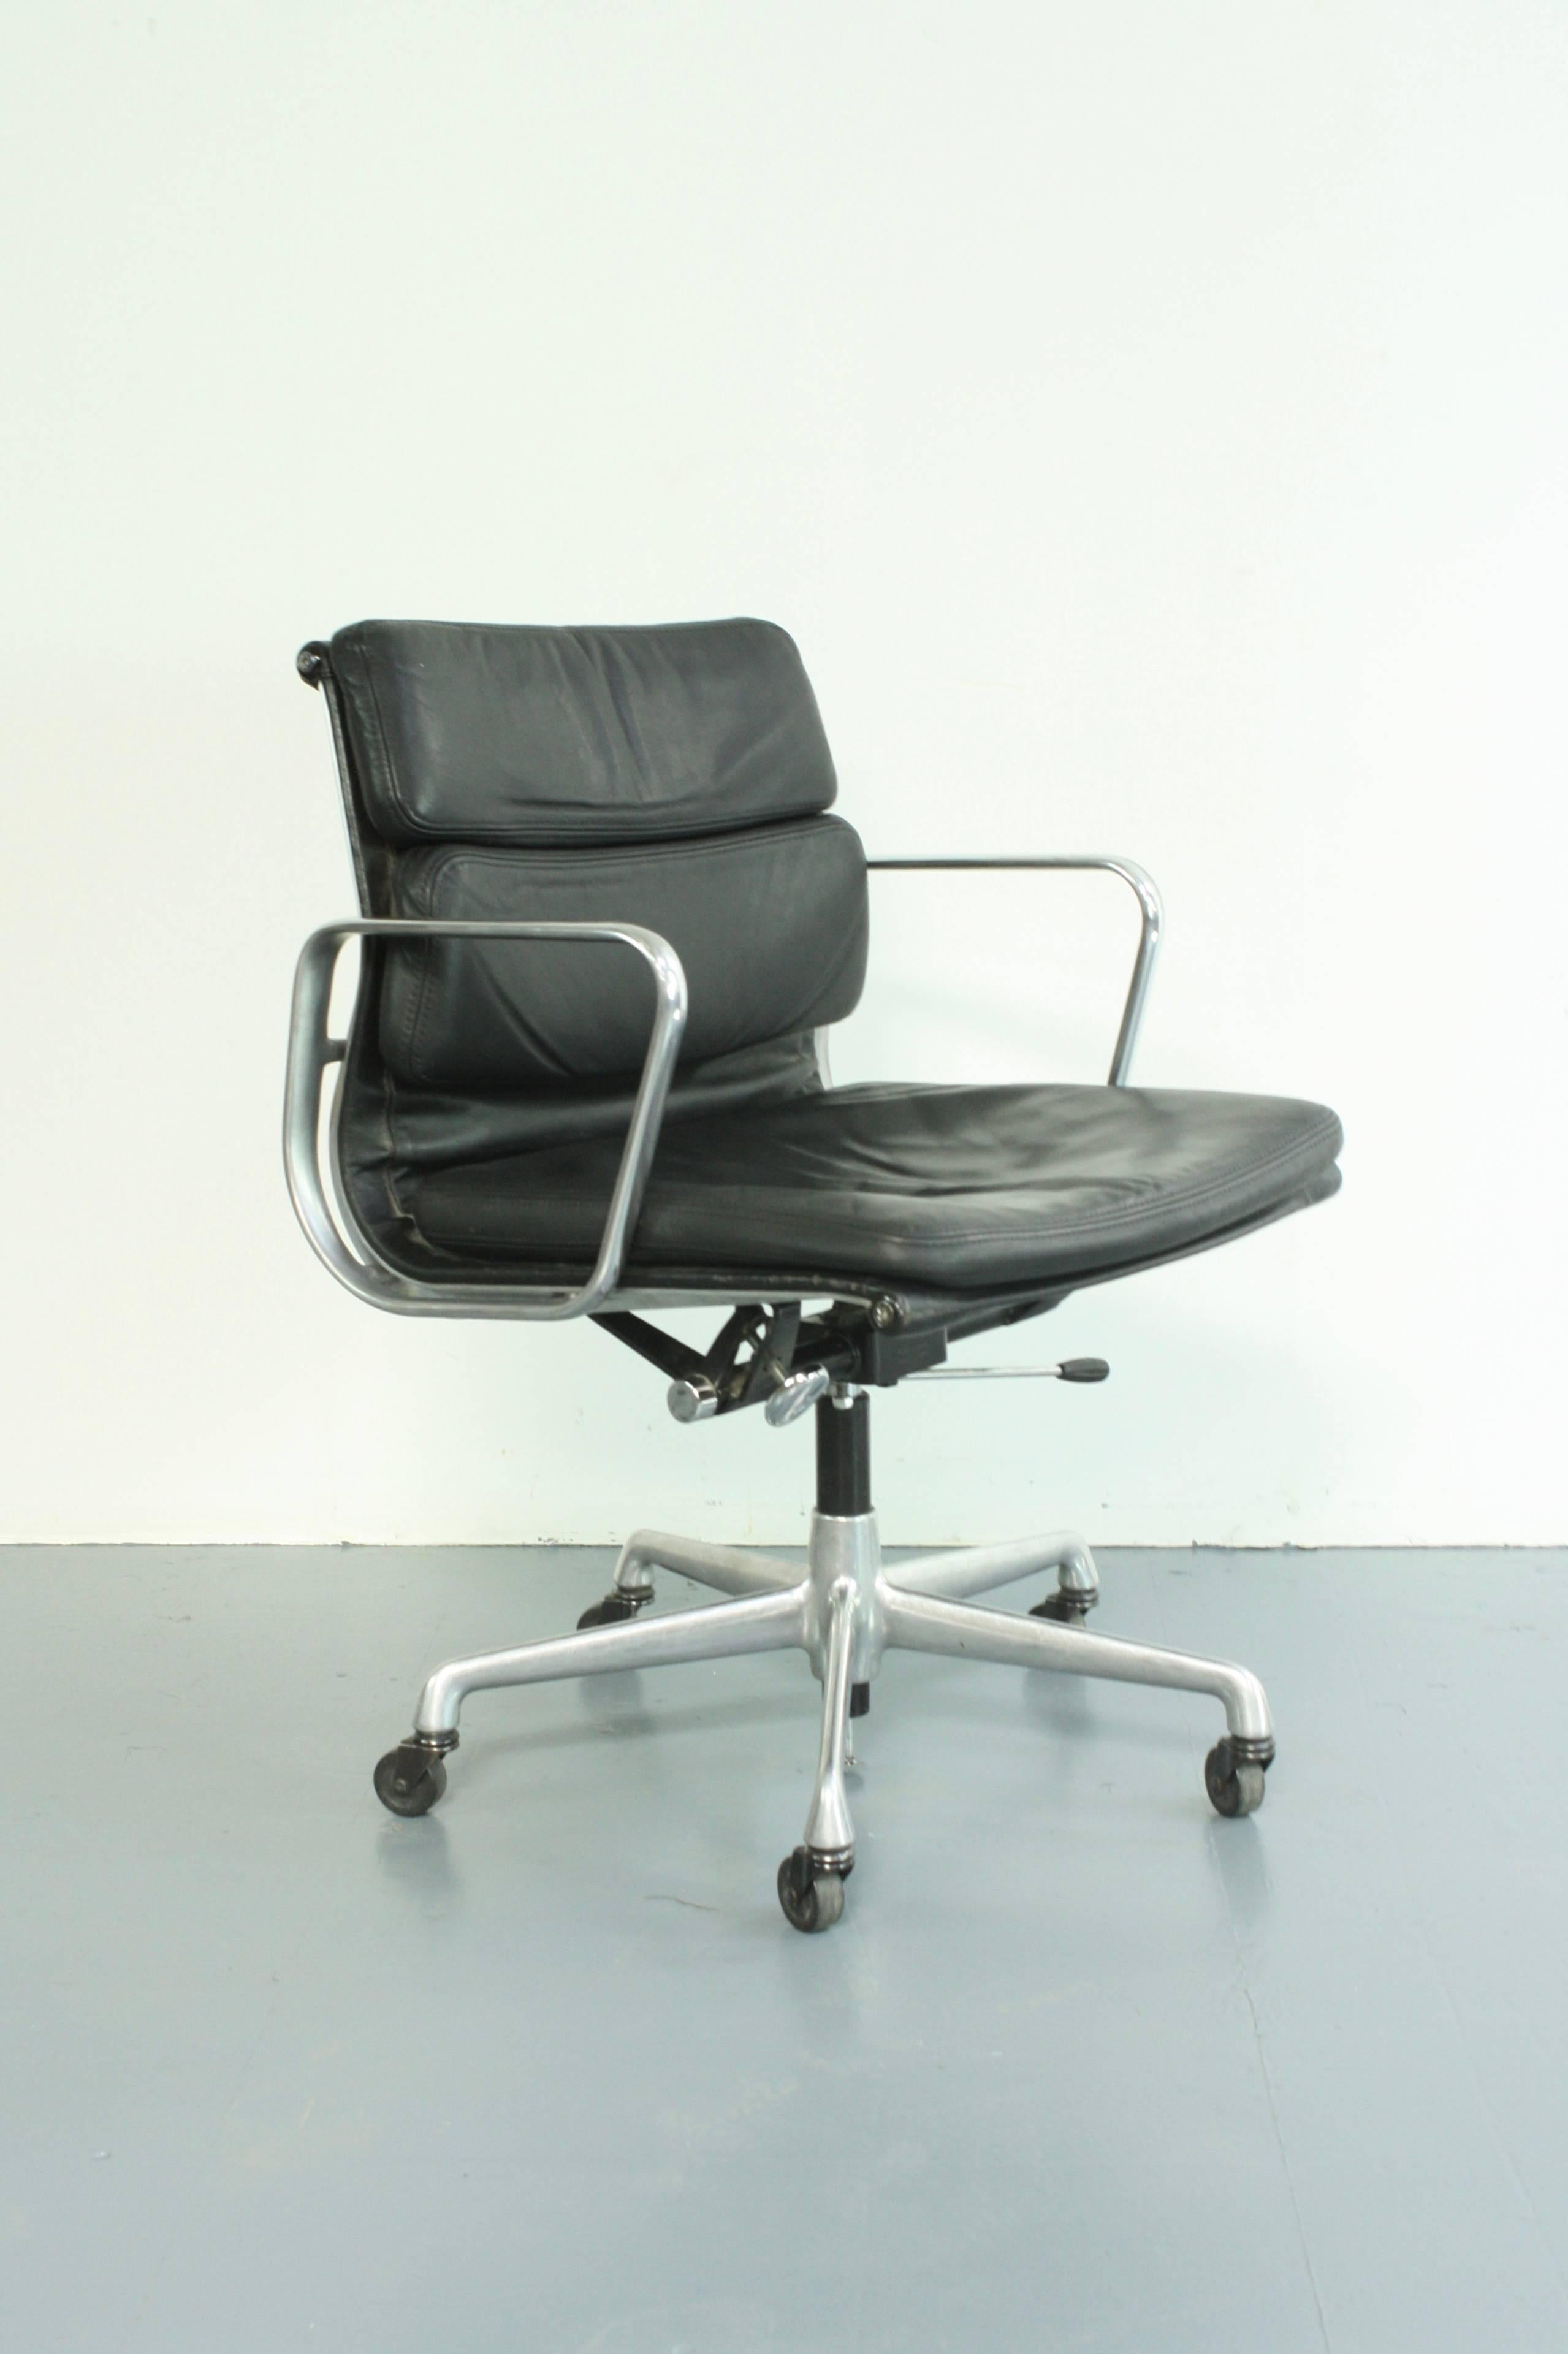 Beautiful vintage black leather Soft Pad Aluminium Group chair designed by Charles and Ray Eames for Herman Miller in the 1960s. 

In good vintage condition. There is some age-related wear to the leather but nothing serious or specific to mention.